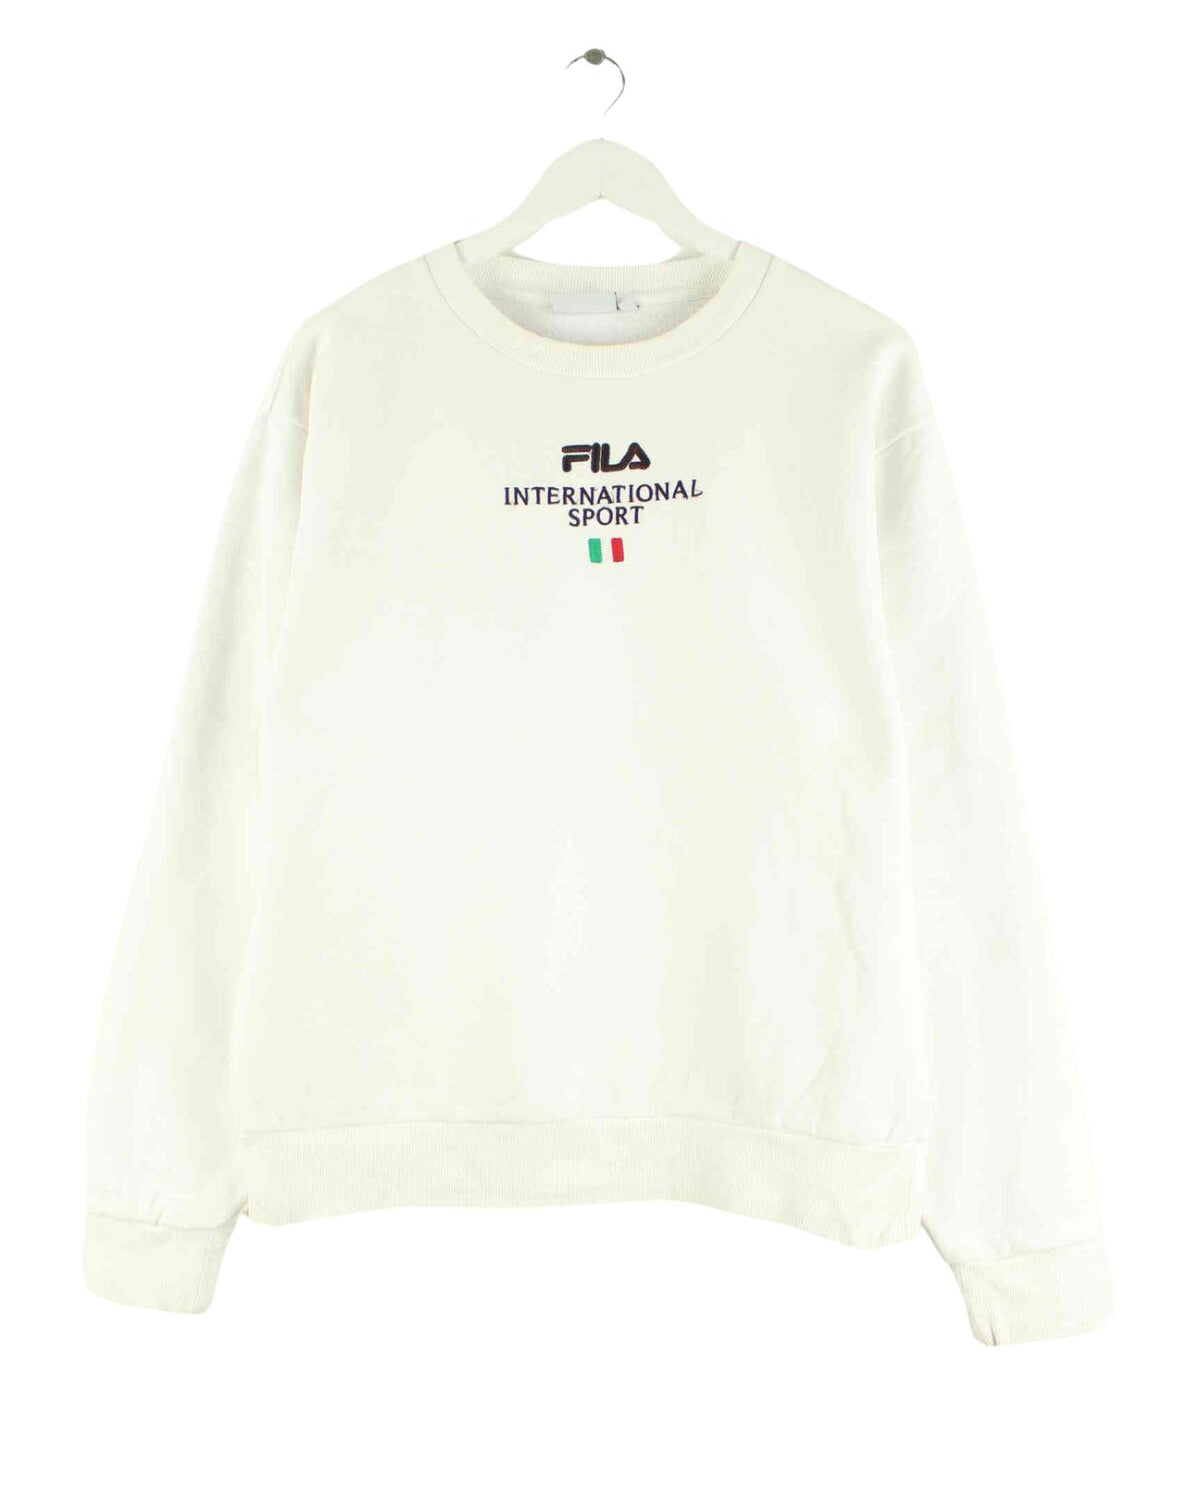 Fila International Sport Embroidered Sweater Weiß S (front image)